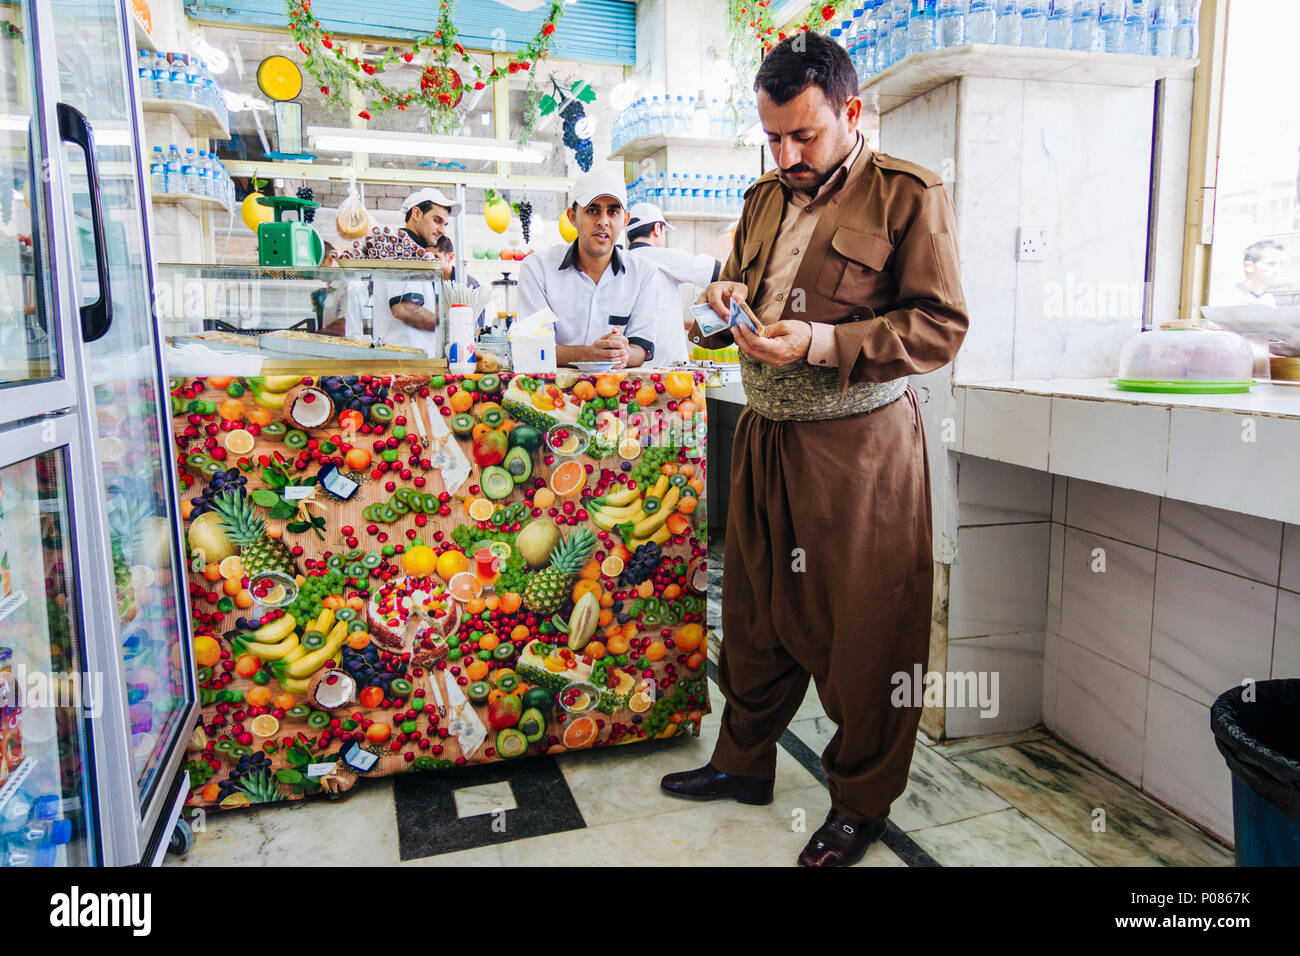 Dohuk, Dohuk Governorate, Kurdistan Region of Iraq : A Kurdish man in regional costume stands at an ice cream parlour in the provincial capital of Doh Stock Photo